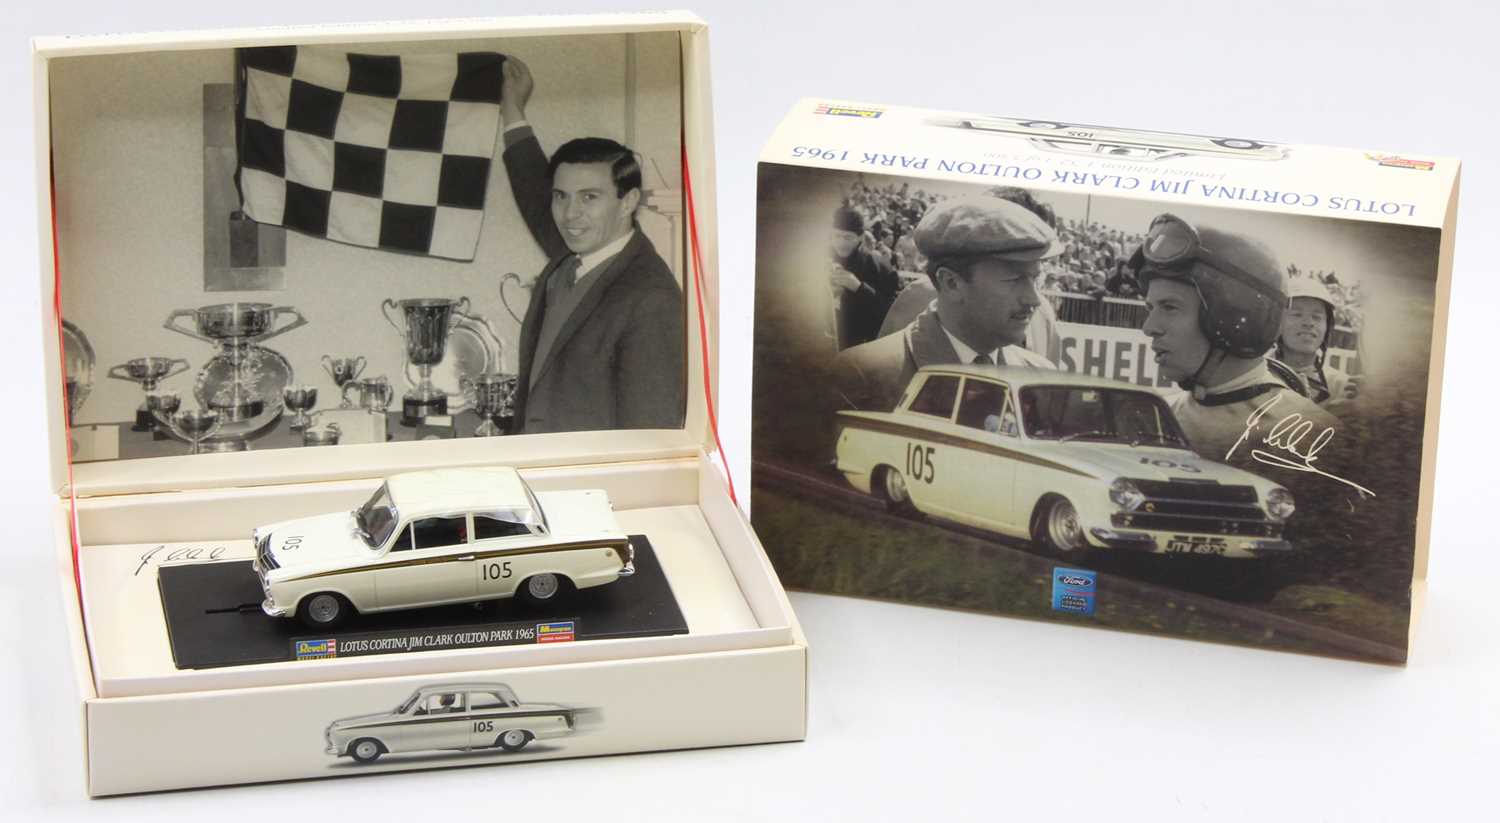 A Revell model racing 1/32nd scale Lotus Cortina as driven by Jim Clark at Oulton Park in 1965, a